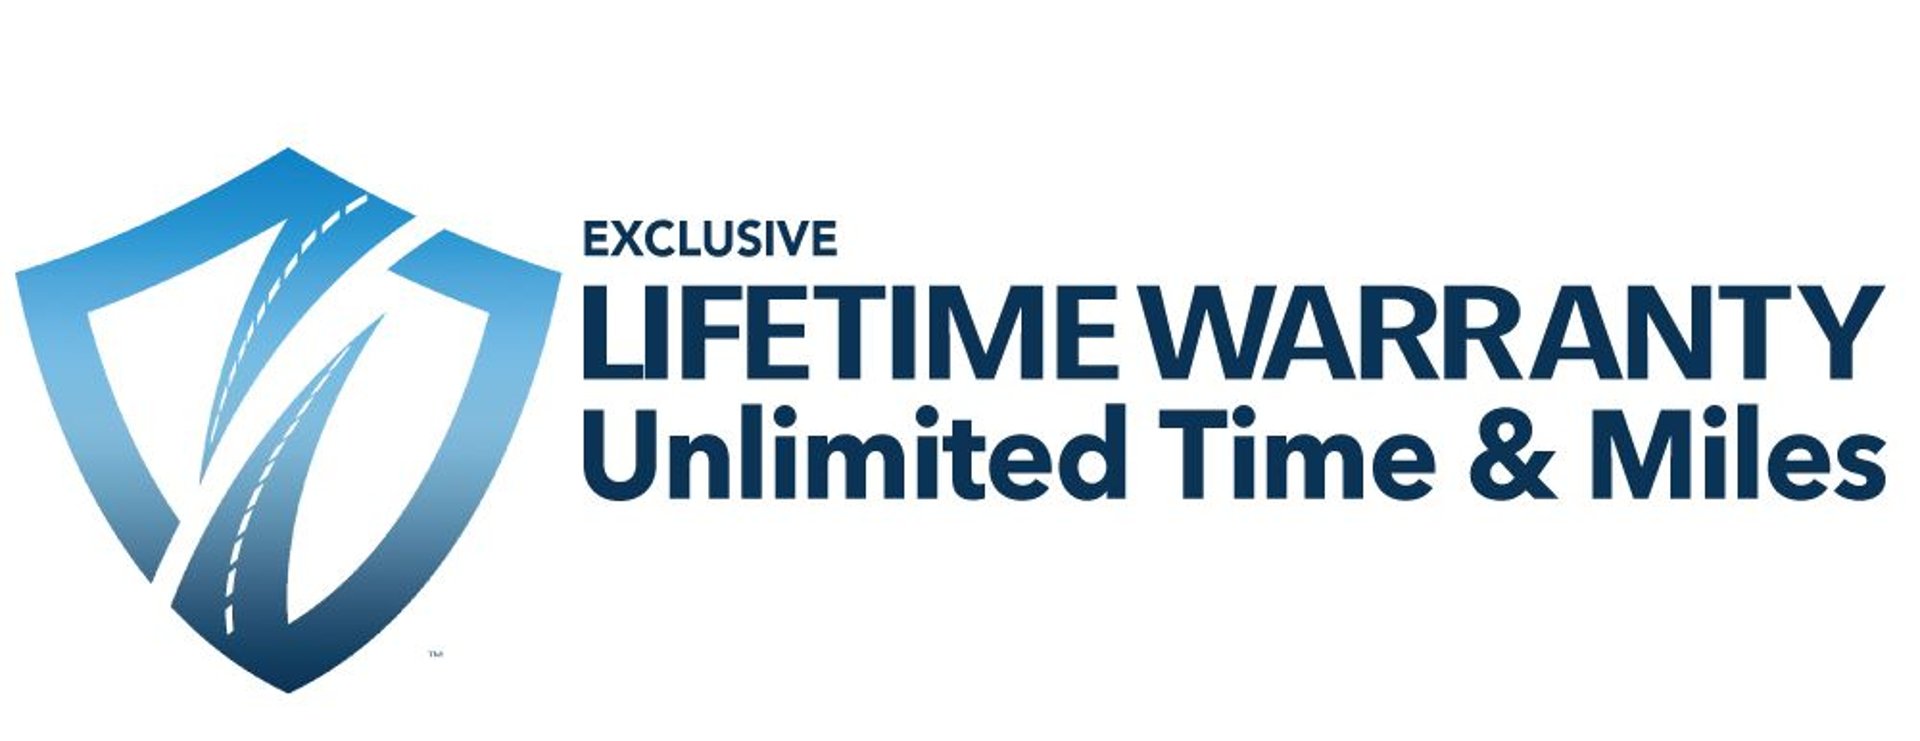 LifeTime Warranty and Unlimited Time & miles